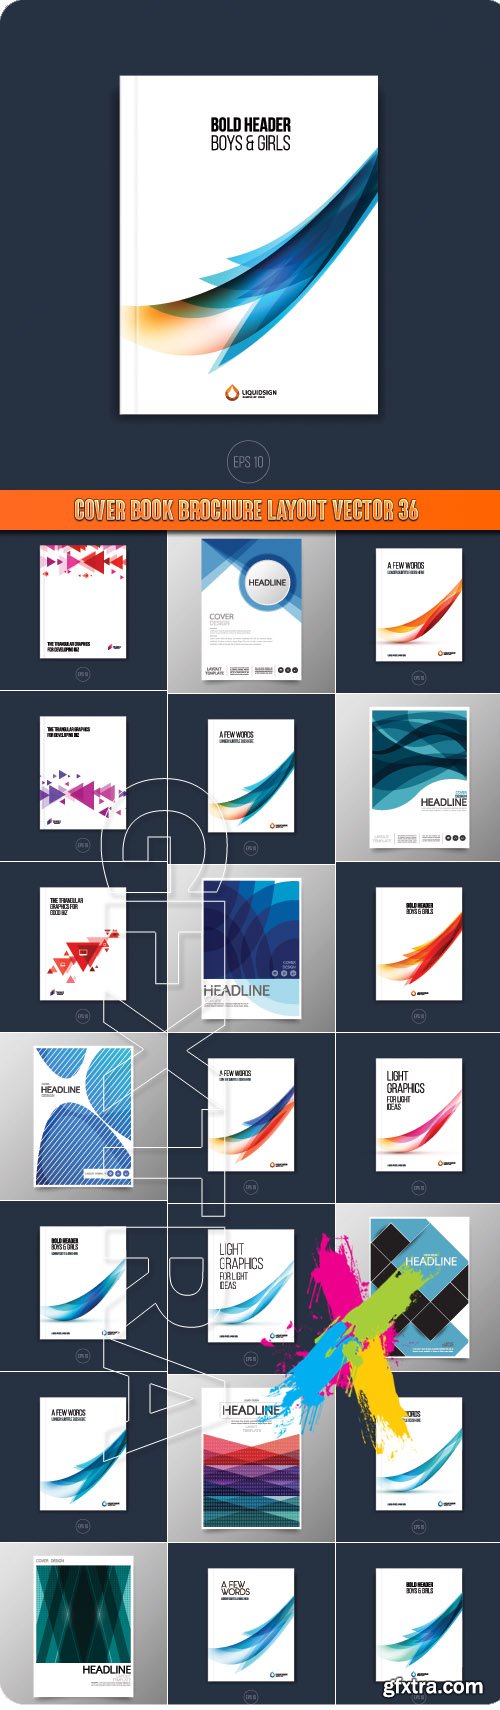 Cover book brochure layout vector 36